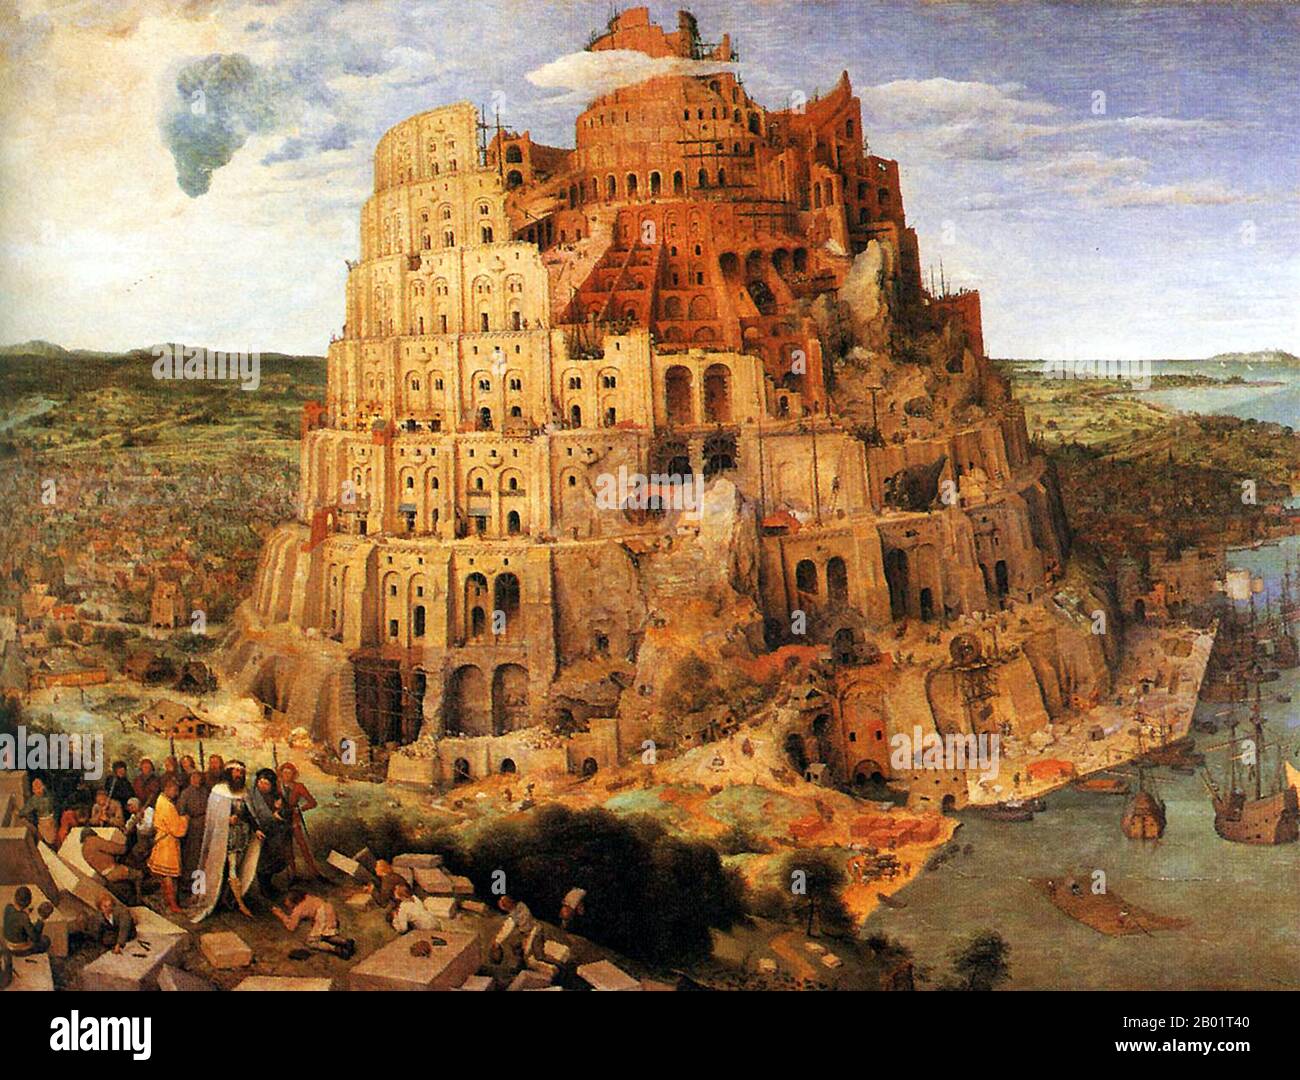 Belgium/Iraq/Mesopotamia: 'The Tower of Babel'. Oil on oak wood painting by Pieter Bruegel the Elder (1526 - 9 September 1569), 1563.  The Tower of Babel, according to the Book of Genesis, was an enormous tower built in the plain of Shinar.  According to the biblical account, a united humanity of the generations following the Great Flood, speaking a single language and migrating from the east, came to the land of Shinar, where they resolved to build a city with a tower 'with its top in the heavens...lest we be scattered abroad upon the face of the Earth'. Stock Photo